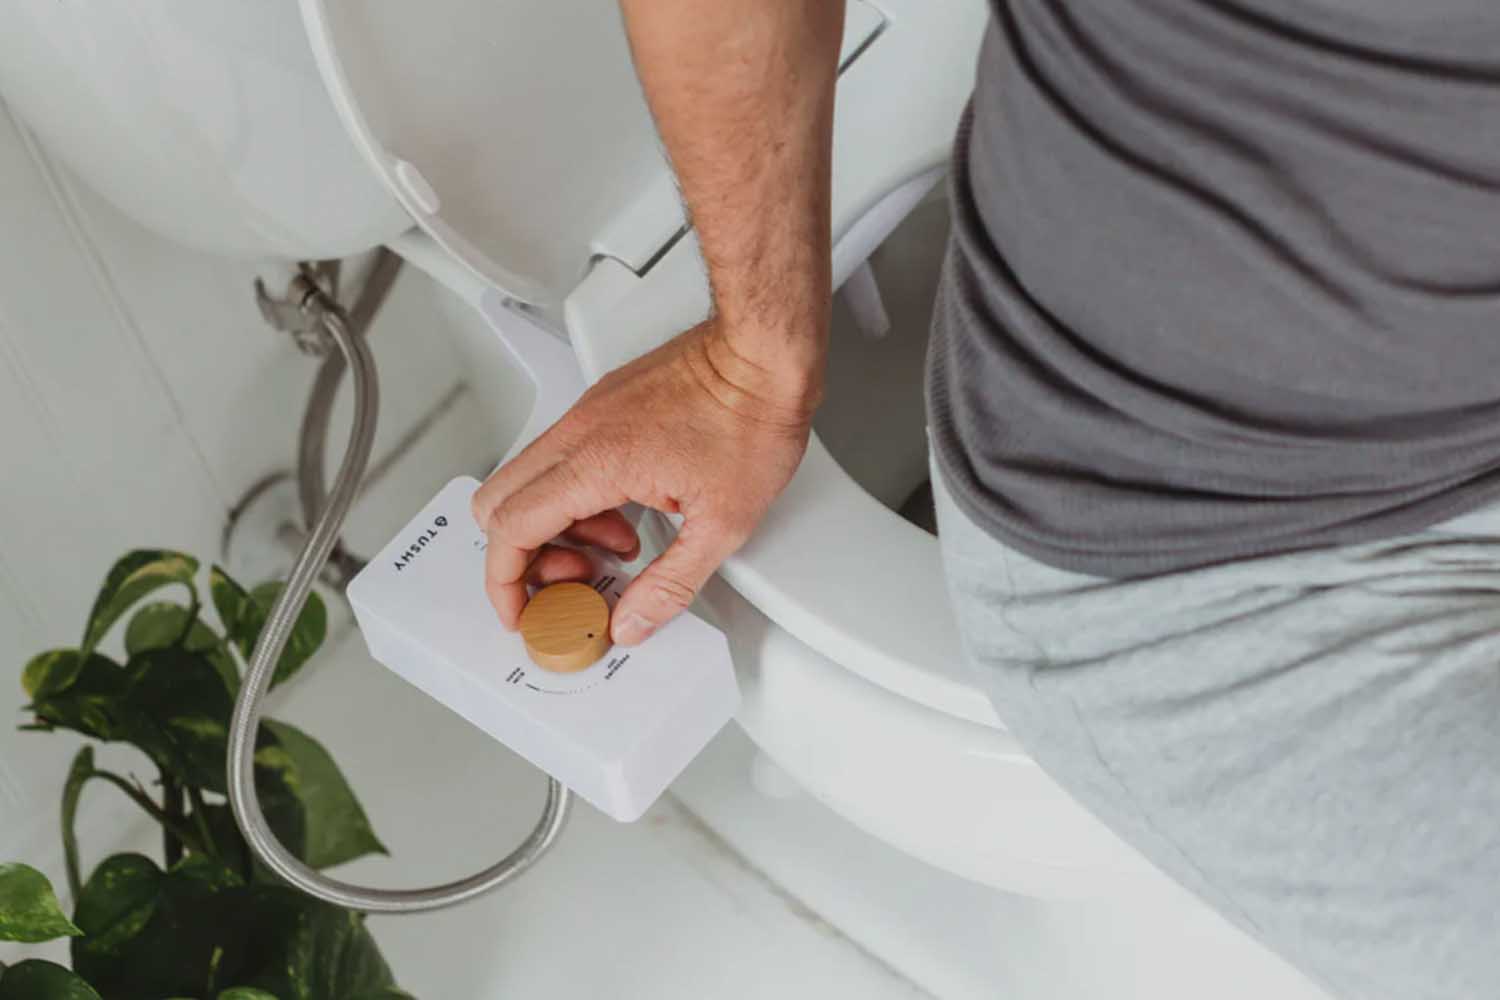 The Toilet Paper Shortage Isn't a Thing Anymore, But Bidets Are Still Awesome